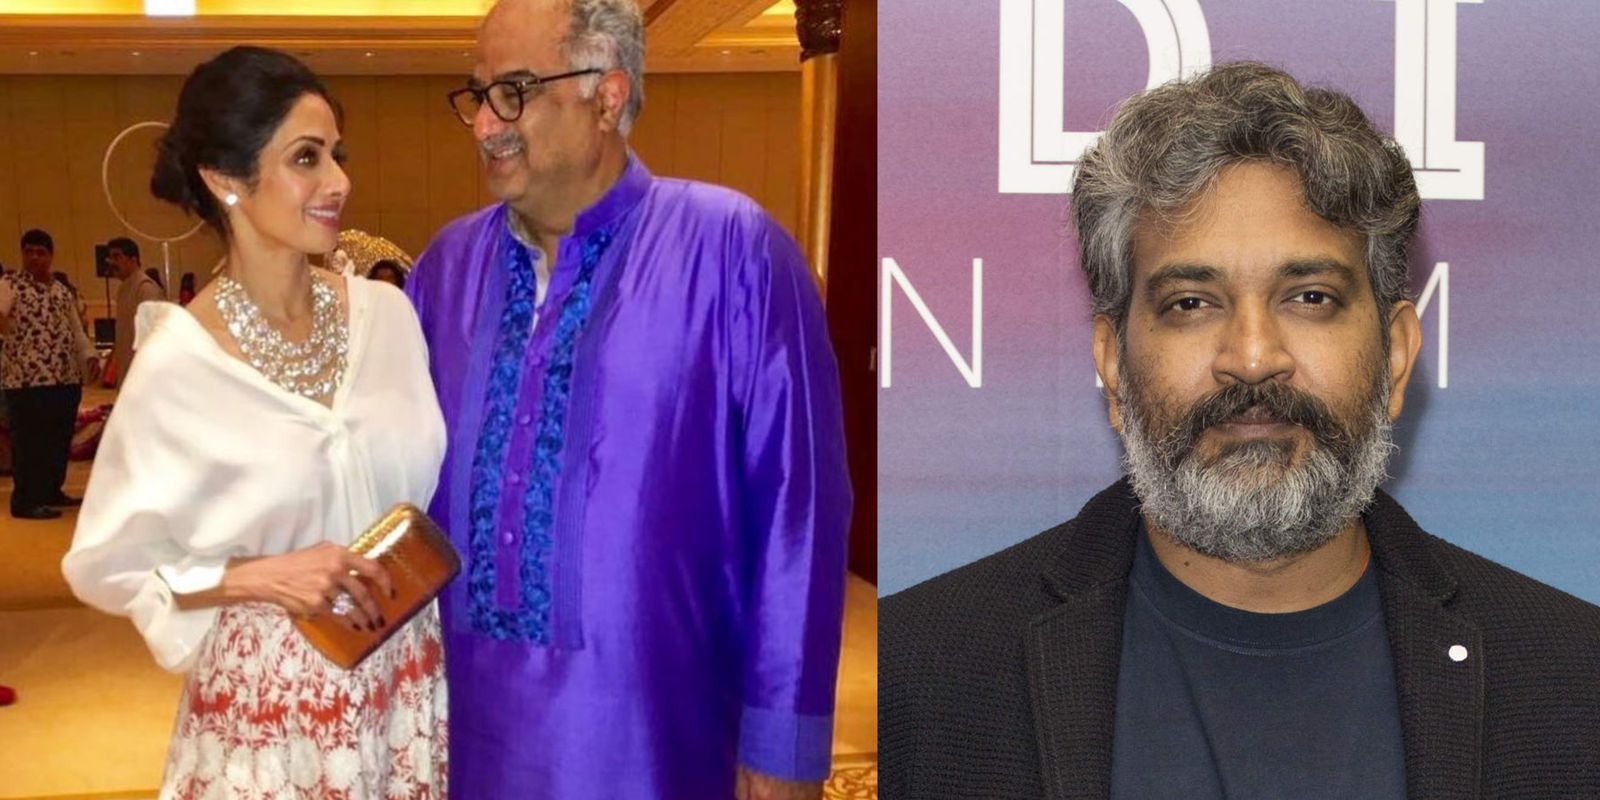 Boney Kapoor And S.S. Rajamouli On Bad Terms Since Baahubali; Producer Opens Up On False Rumours About Sridevi